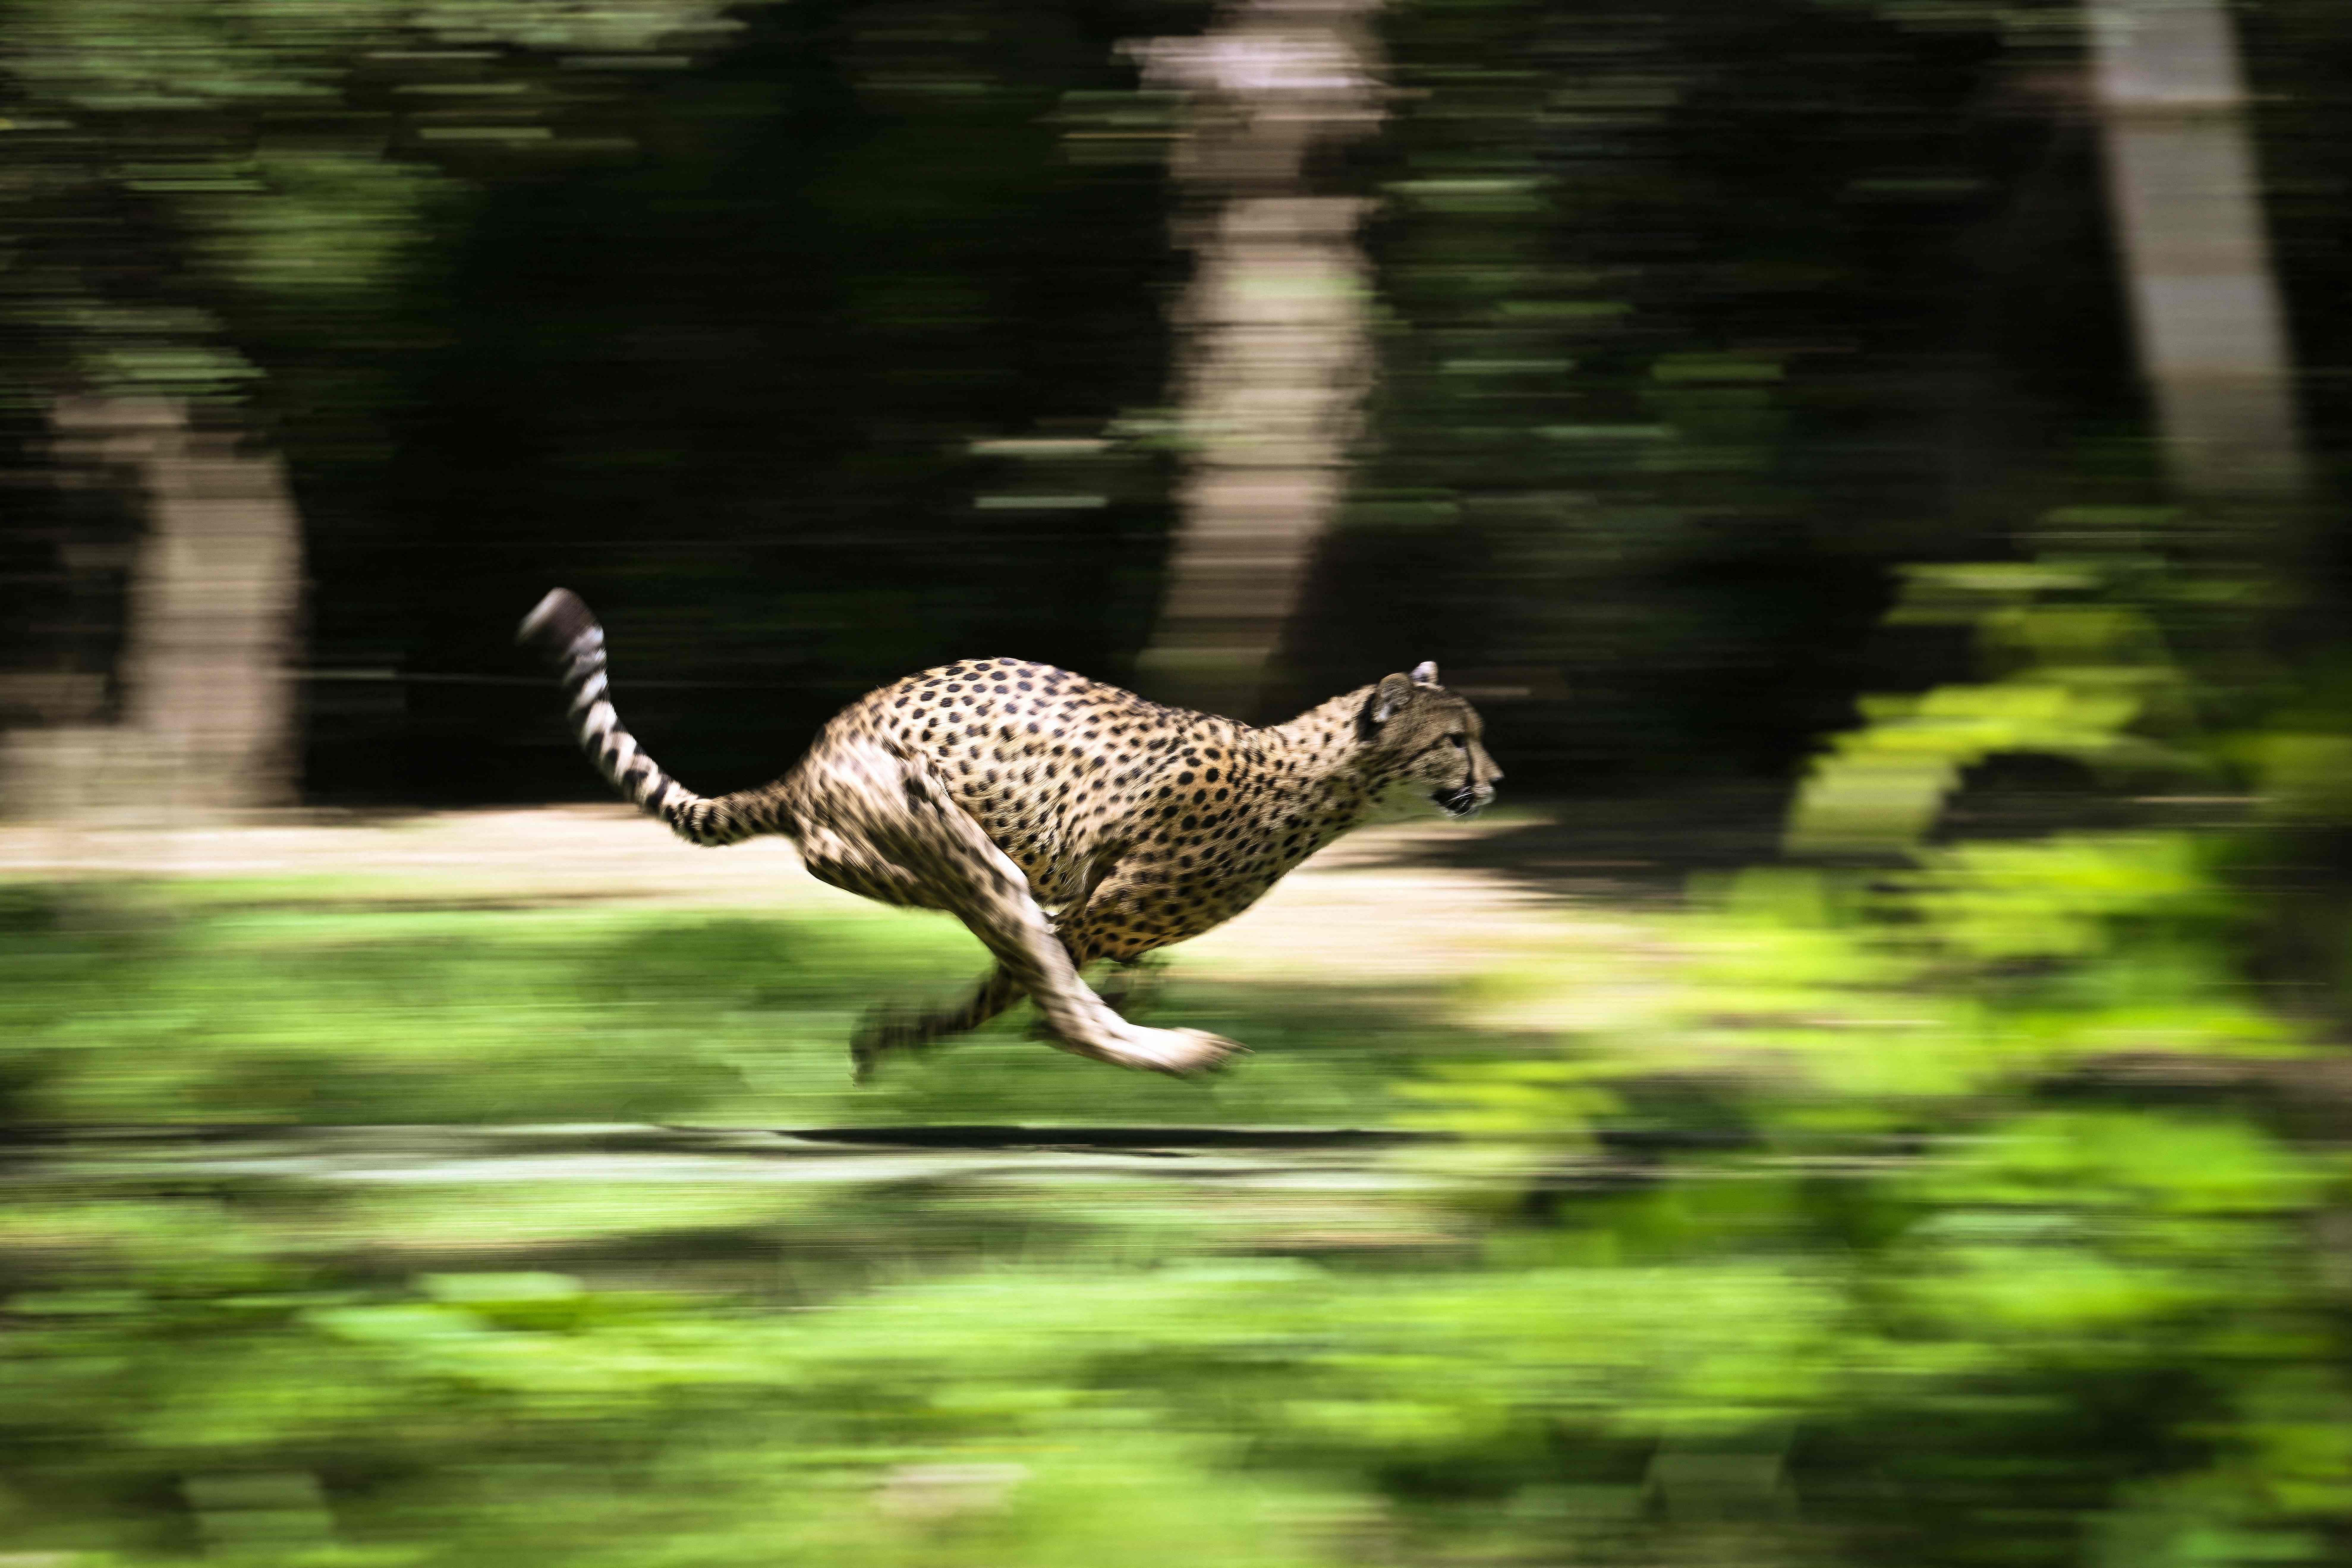 A cheetah runs behind a decoy in its enclosure in the African Safari zoo in Plaisance du Touch, near Toulouse southwestern France, during training in the cheetah race to fight against the sedentary lifestyle of big cats. Credit: AFP Photo